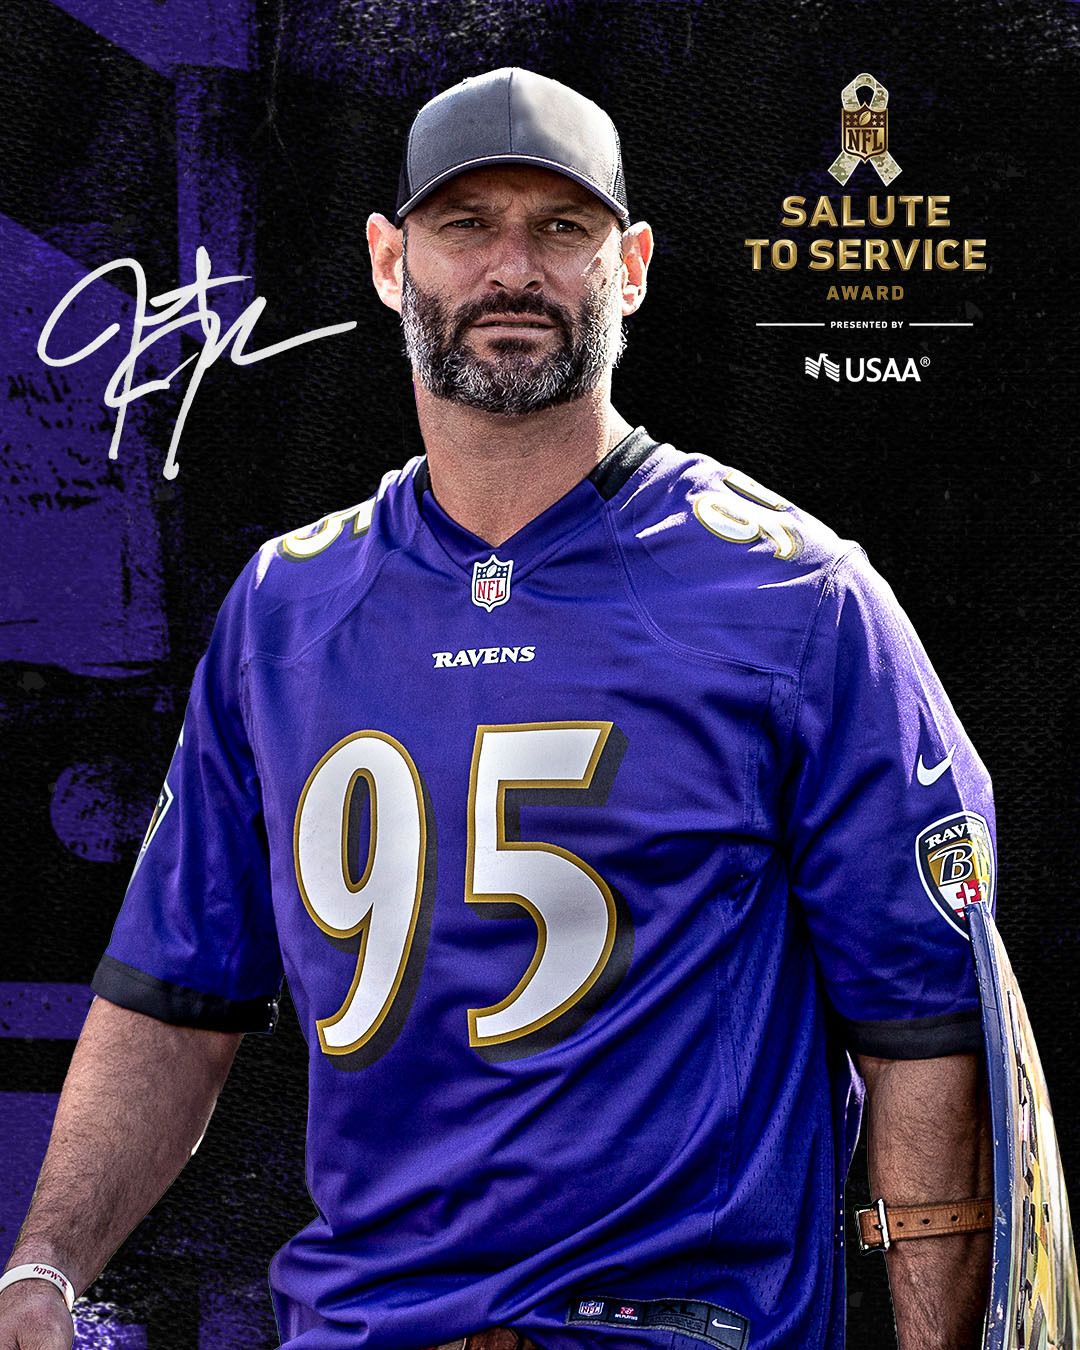 ravens salute to service game 2022